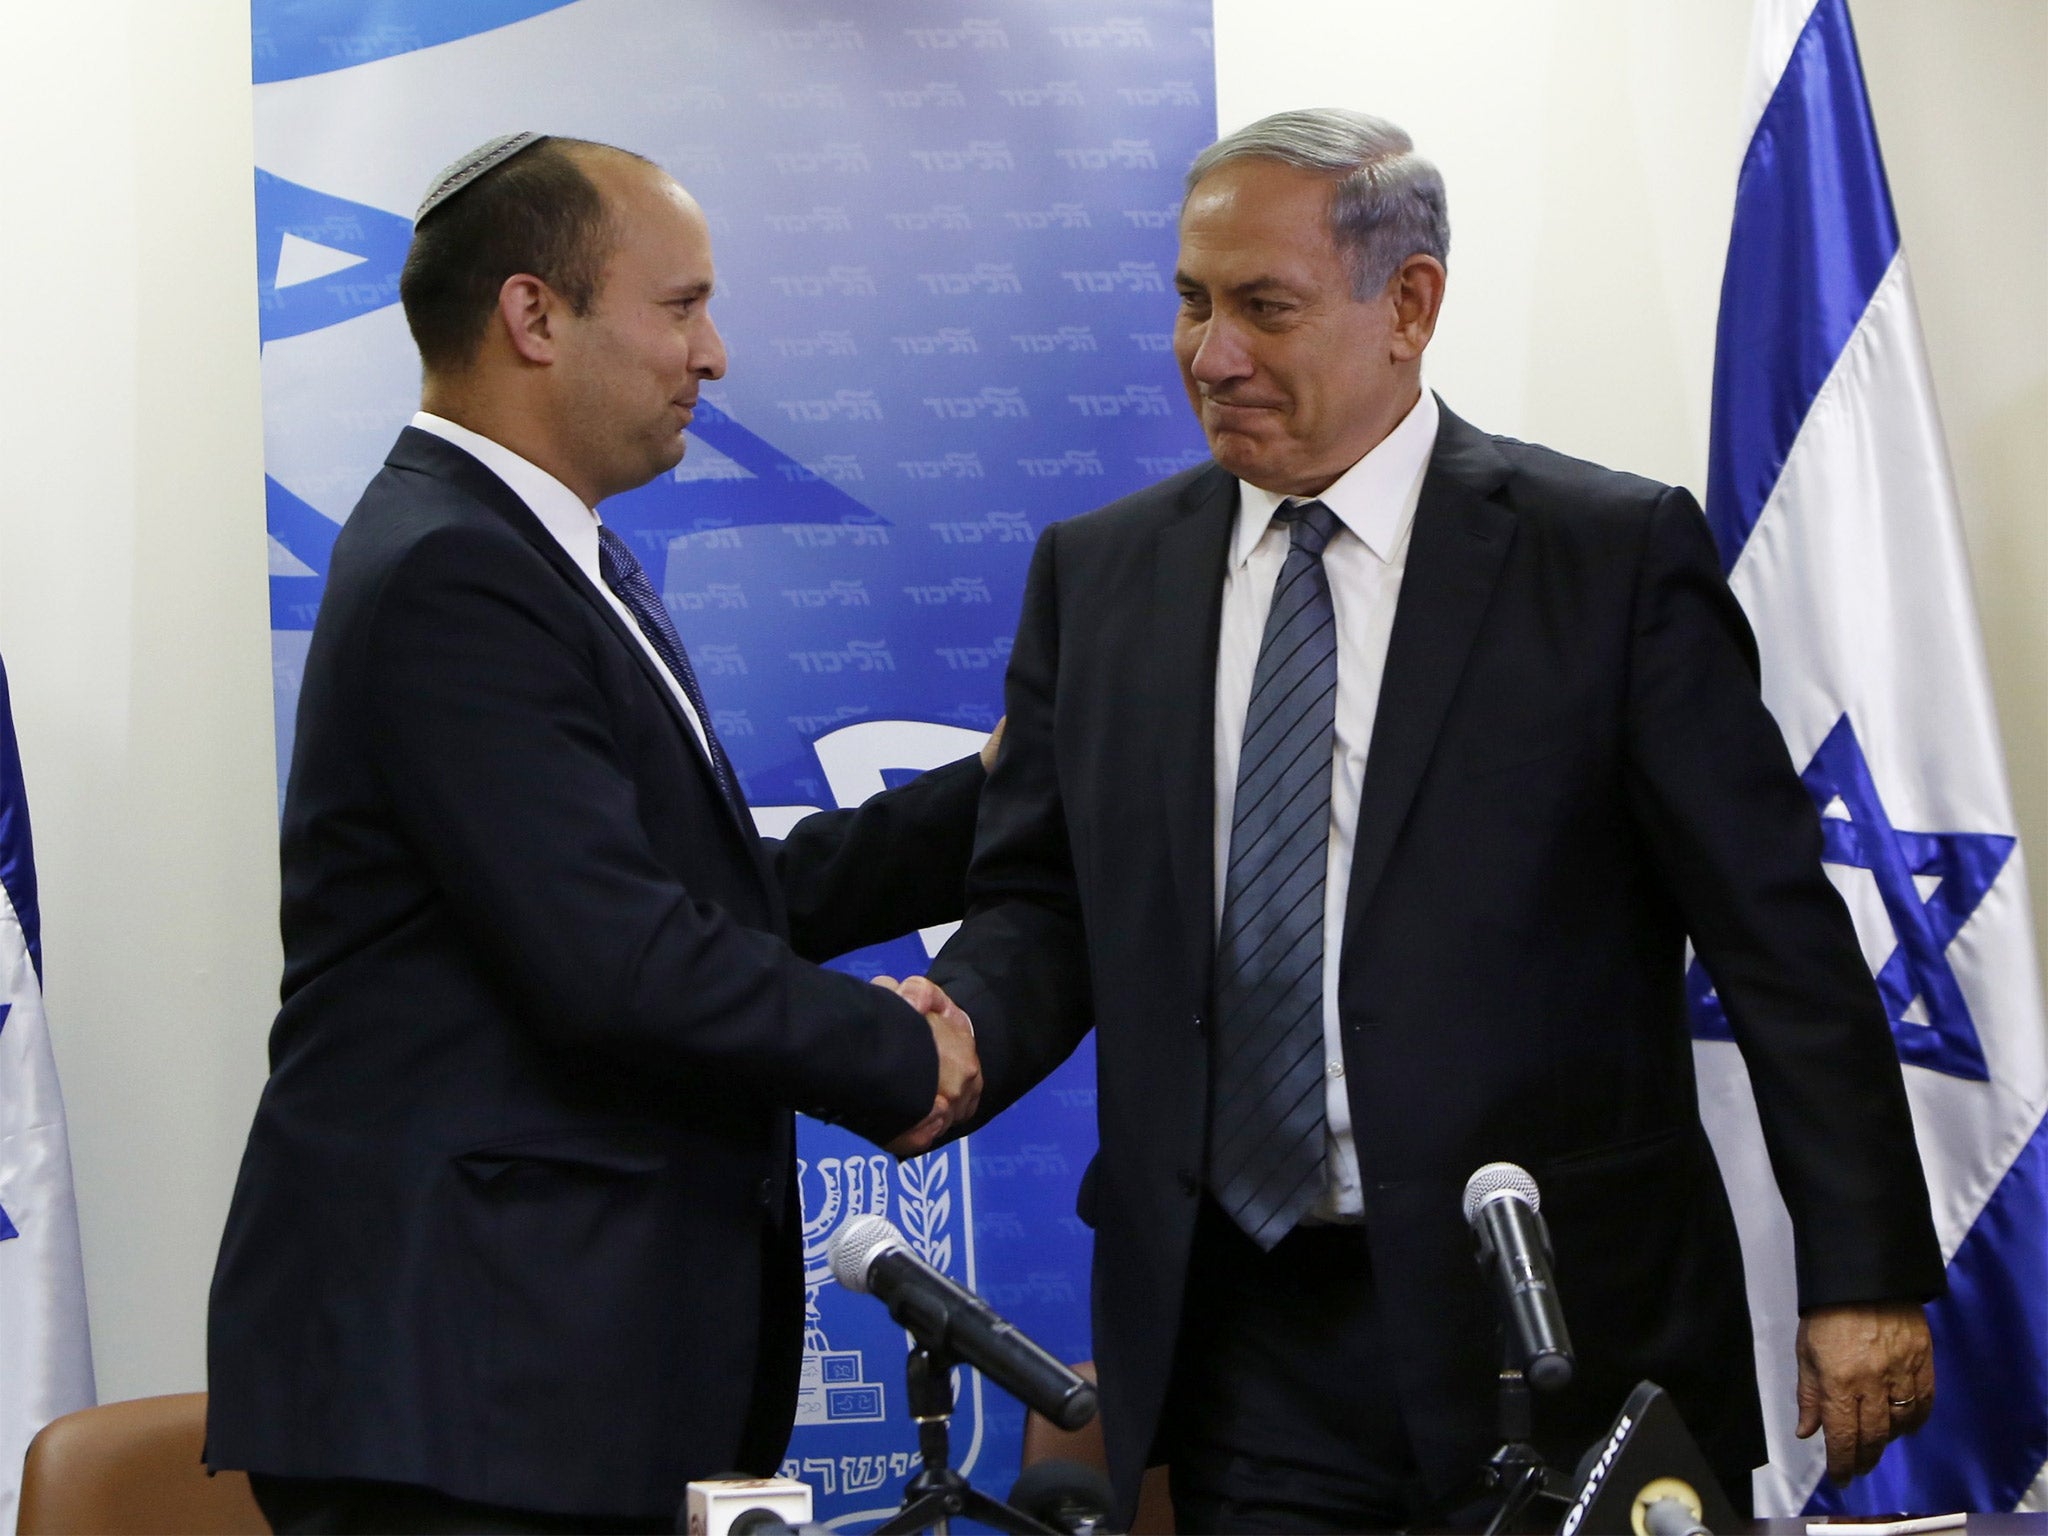 The Prime Minister Benjamin Netanyahu (right) with the head of the right-wing Jewish Home party, Naftali Bennett (Getty)